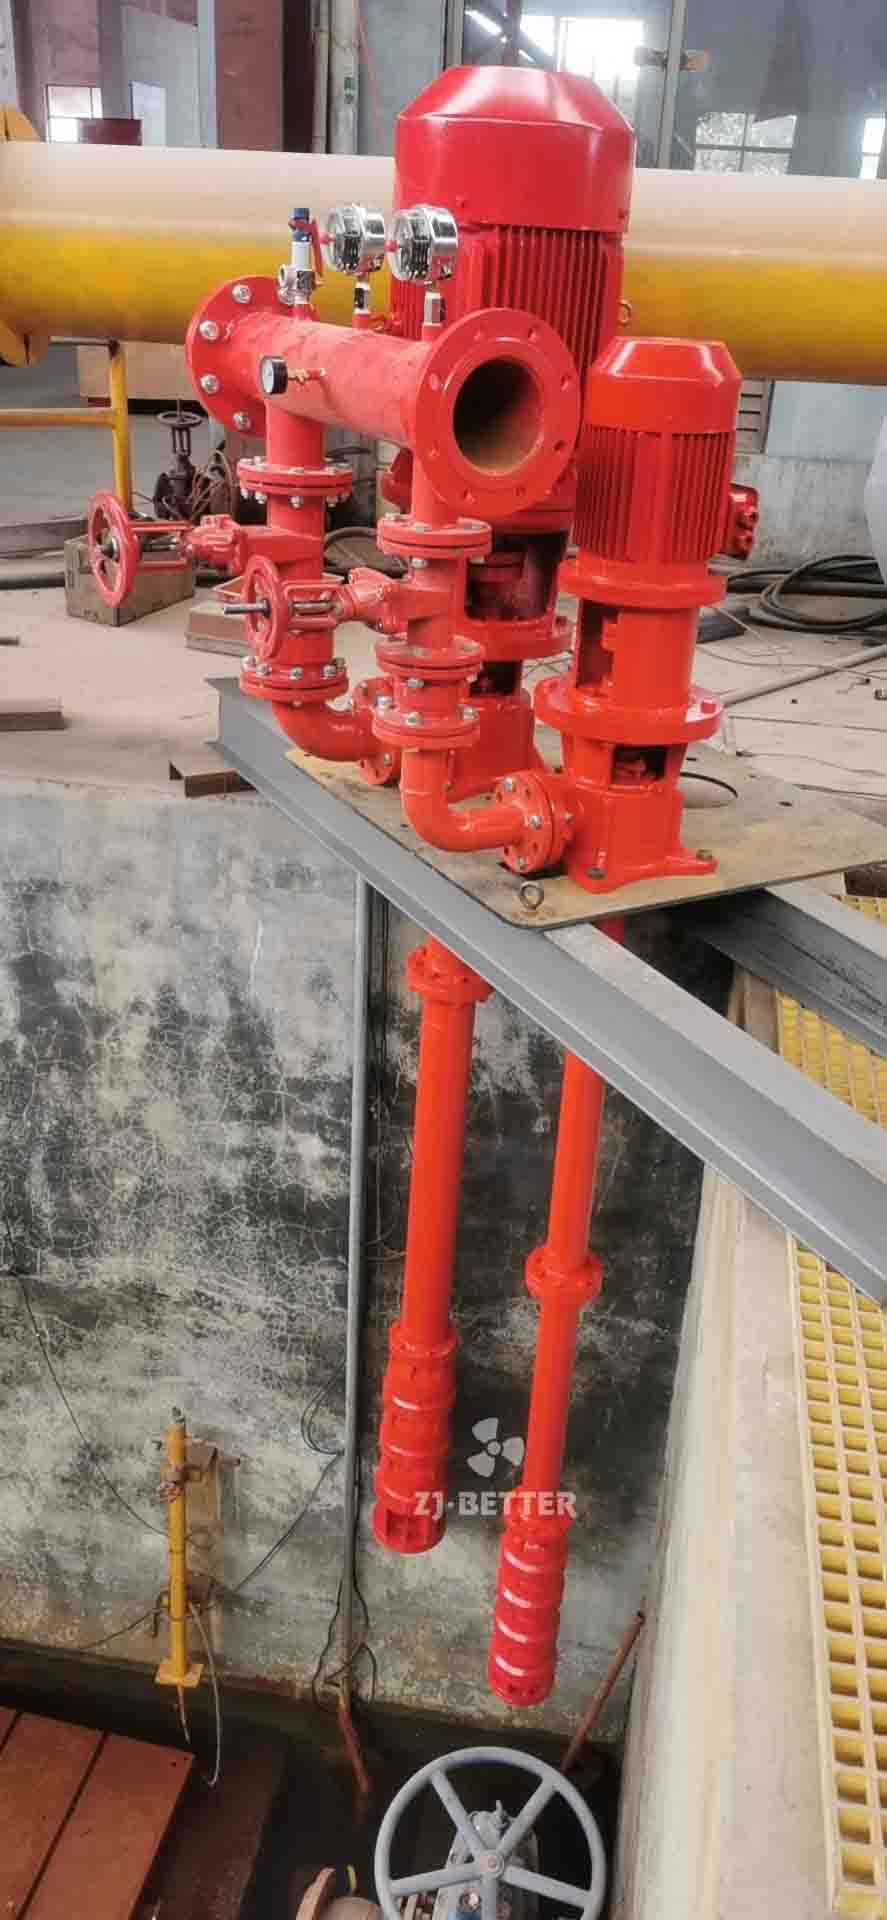 vertical turbine pump test pic in Better Group factory